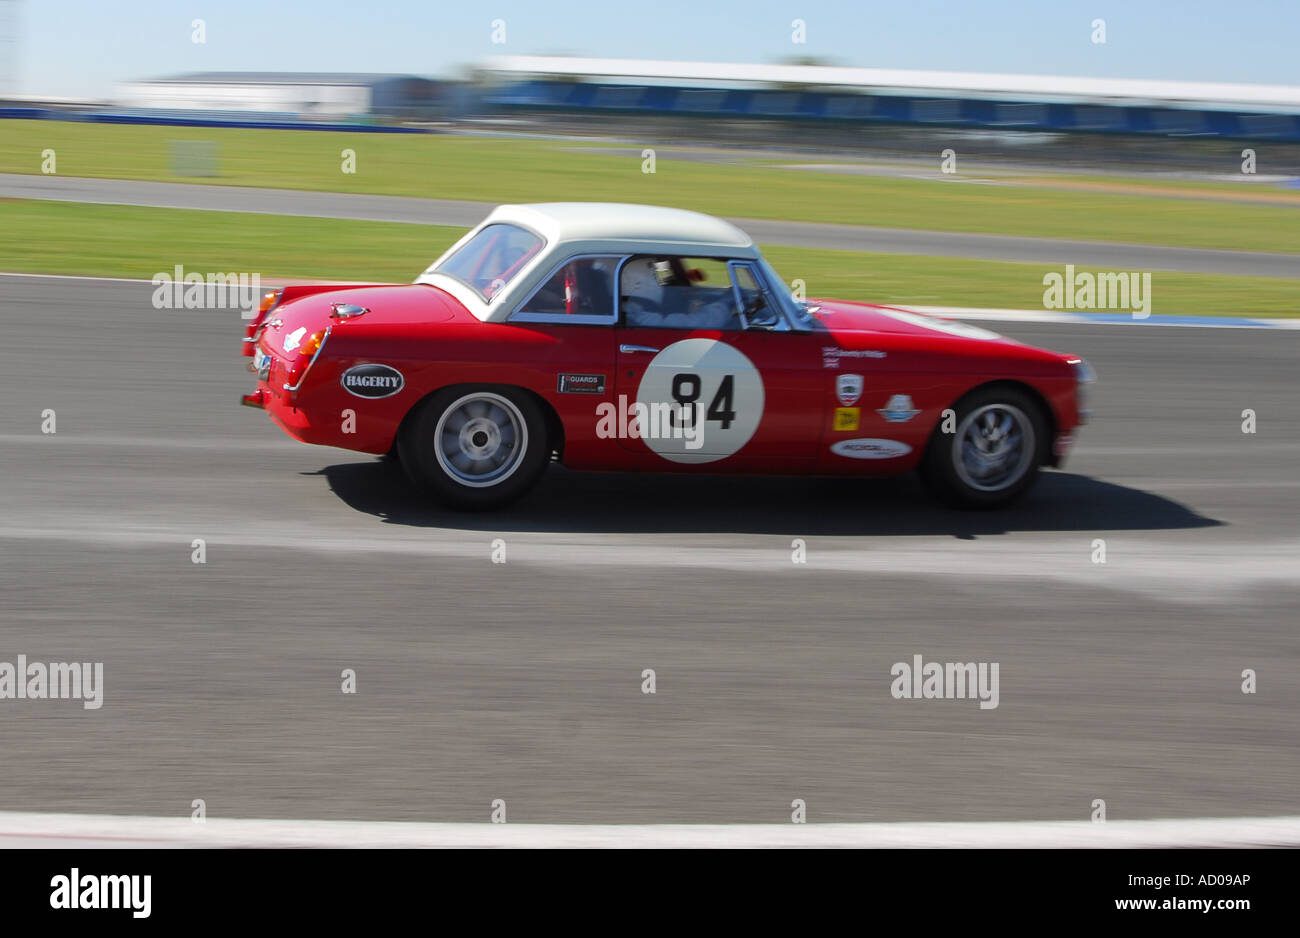 MGB historic racing car on track at Silverstone Stock Photo